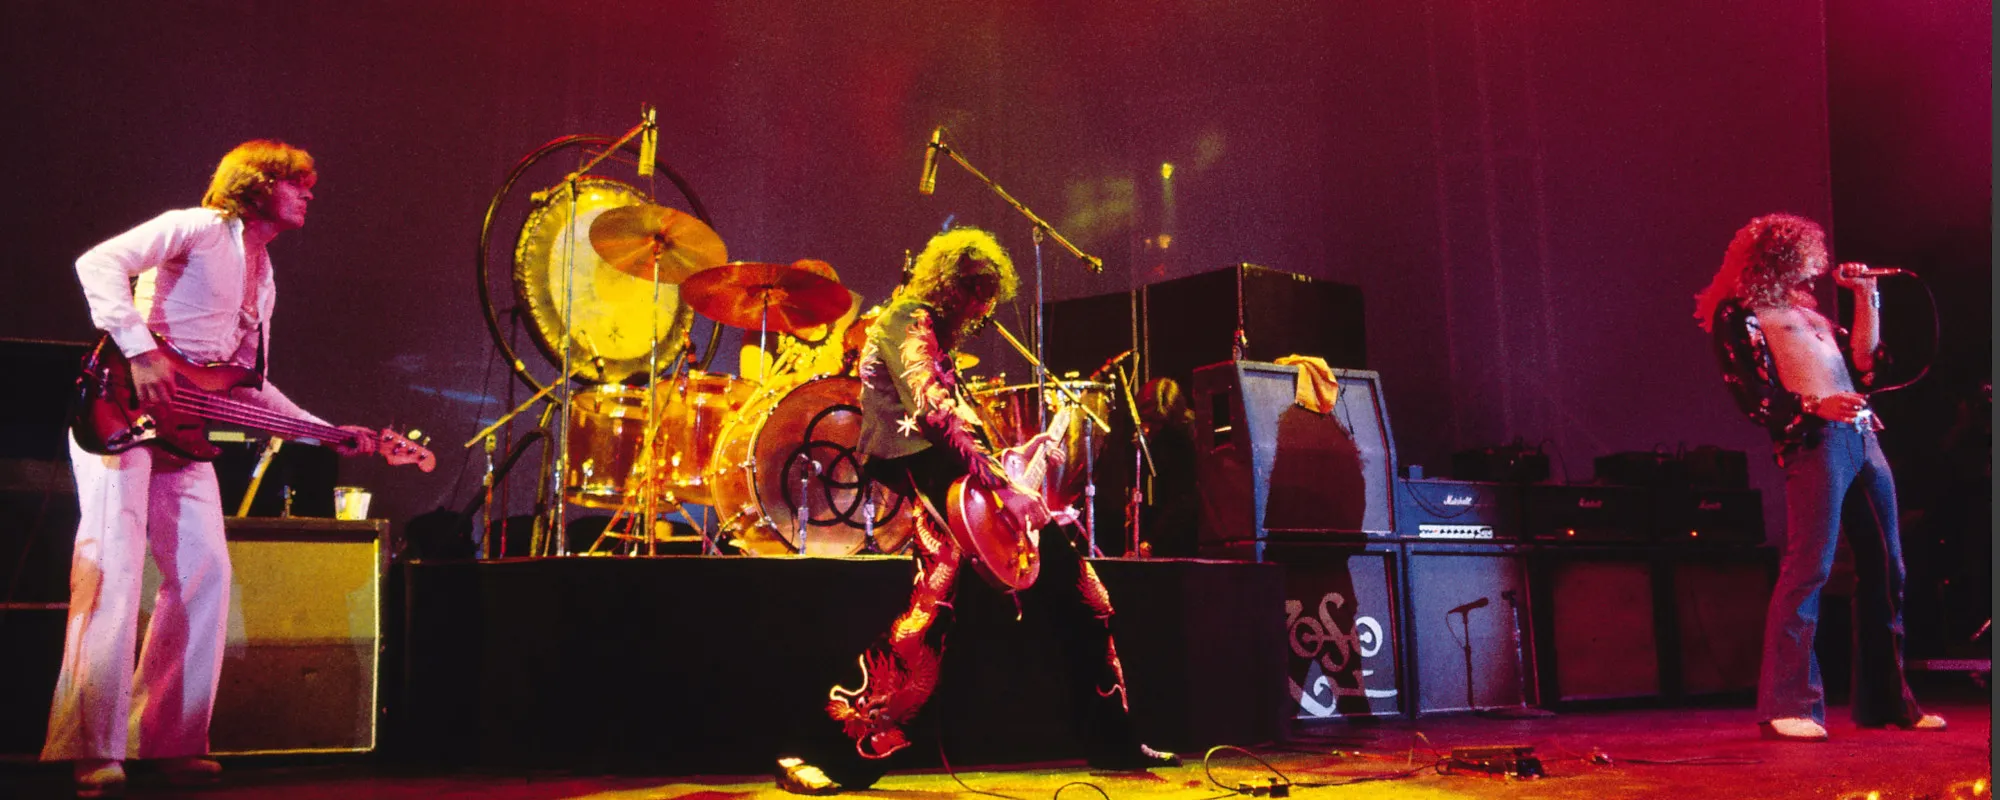 Review: Think You Know Everything About Led Zeppelin’s Music? Think Again….